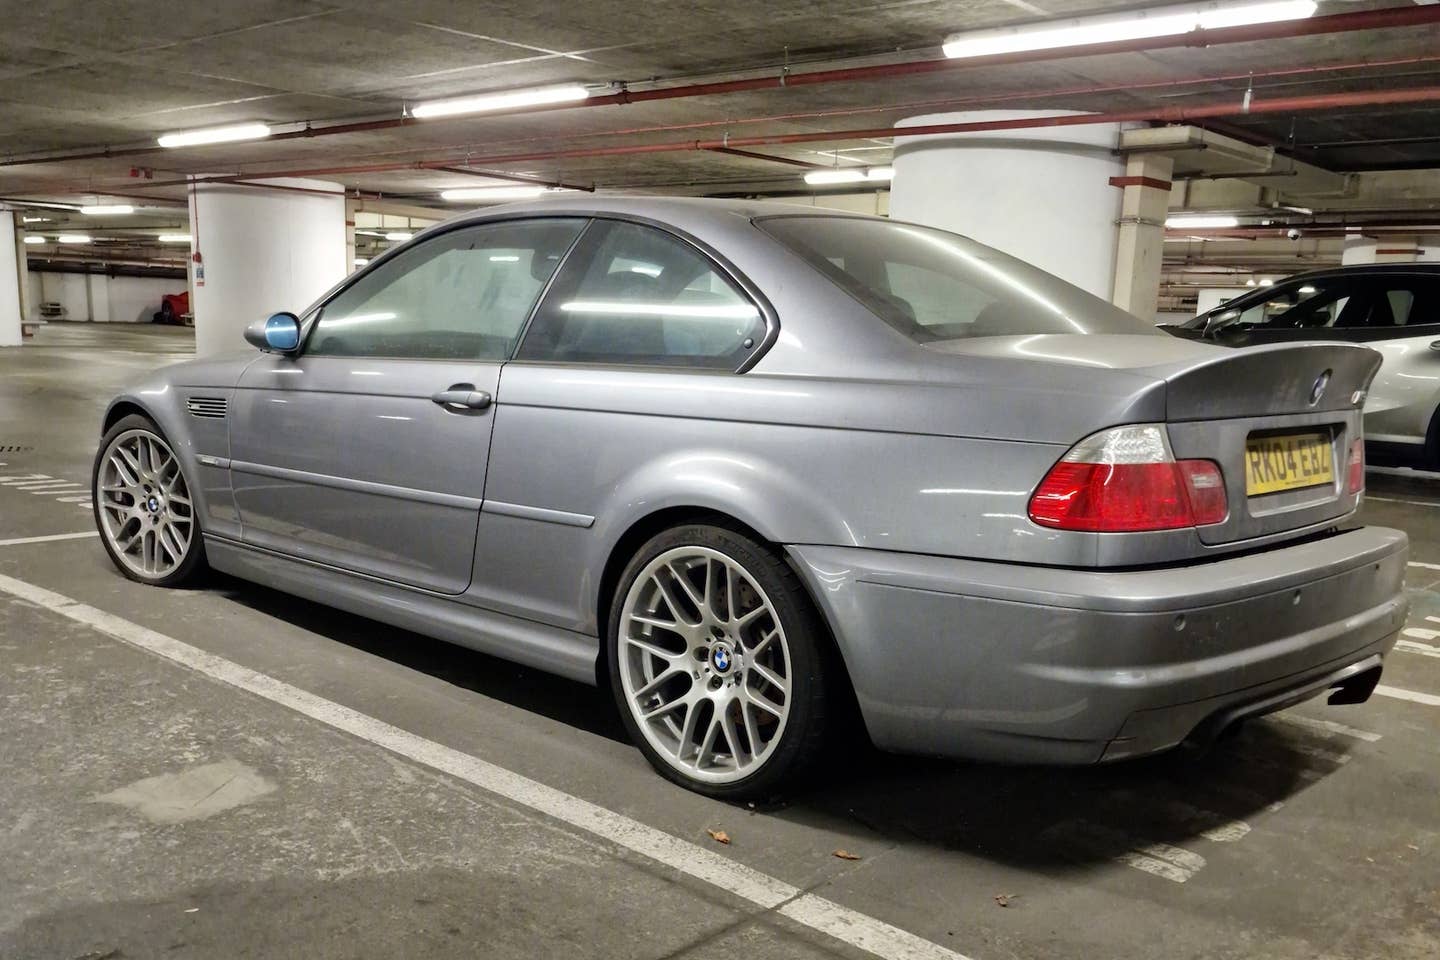 2004 BMW M3 CSL formerly neglected in a London parking garage.